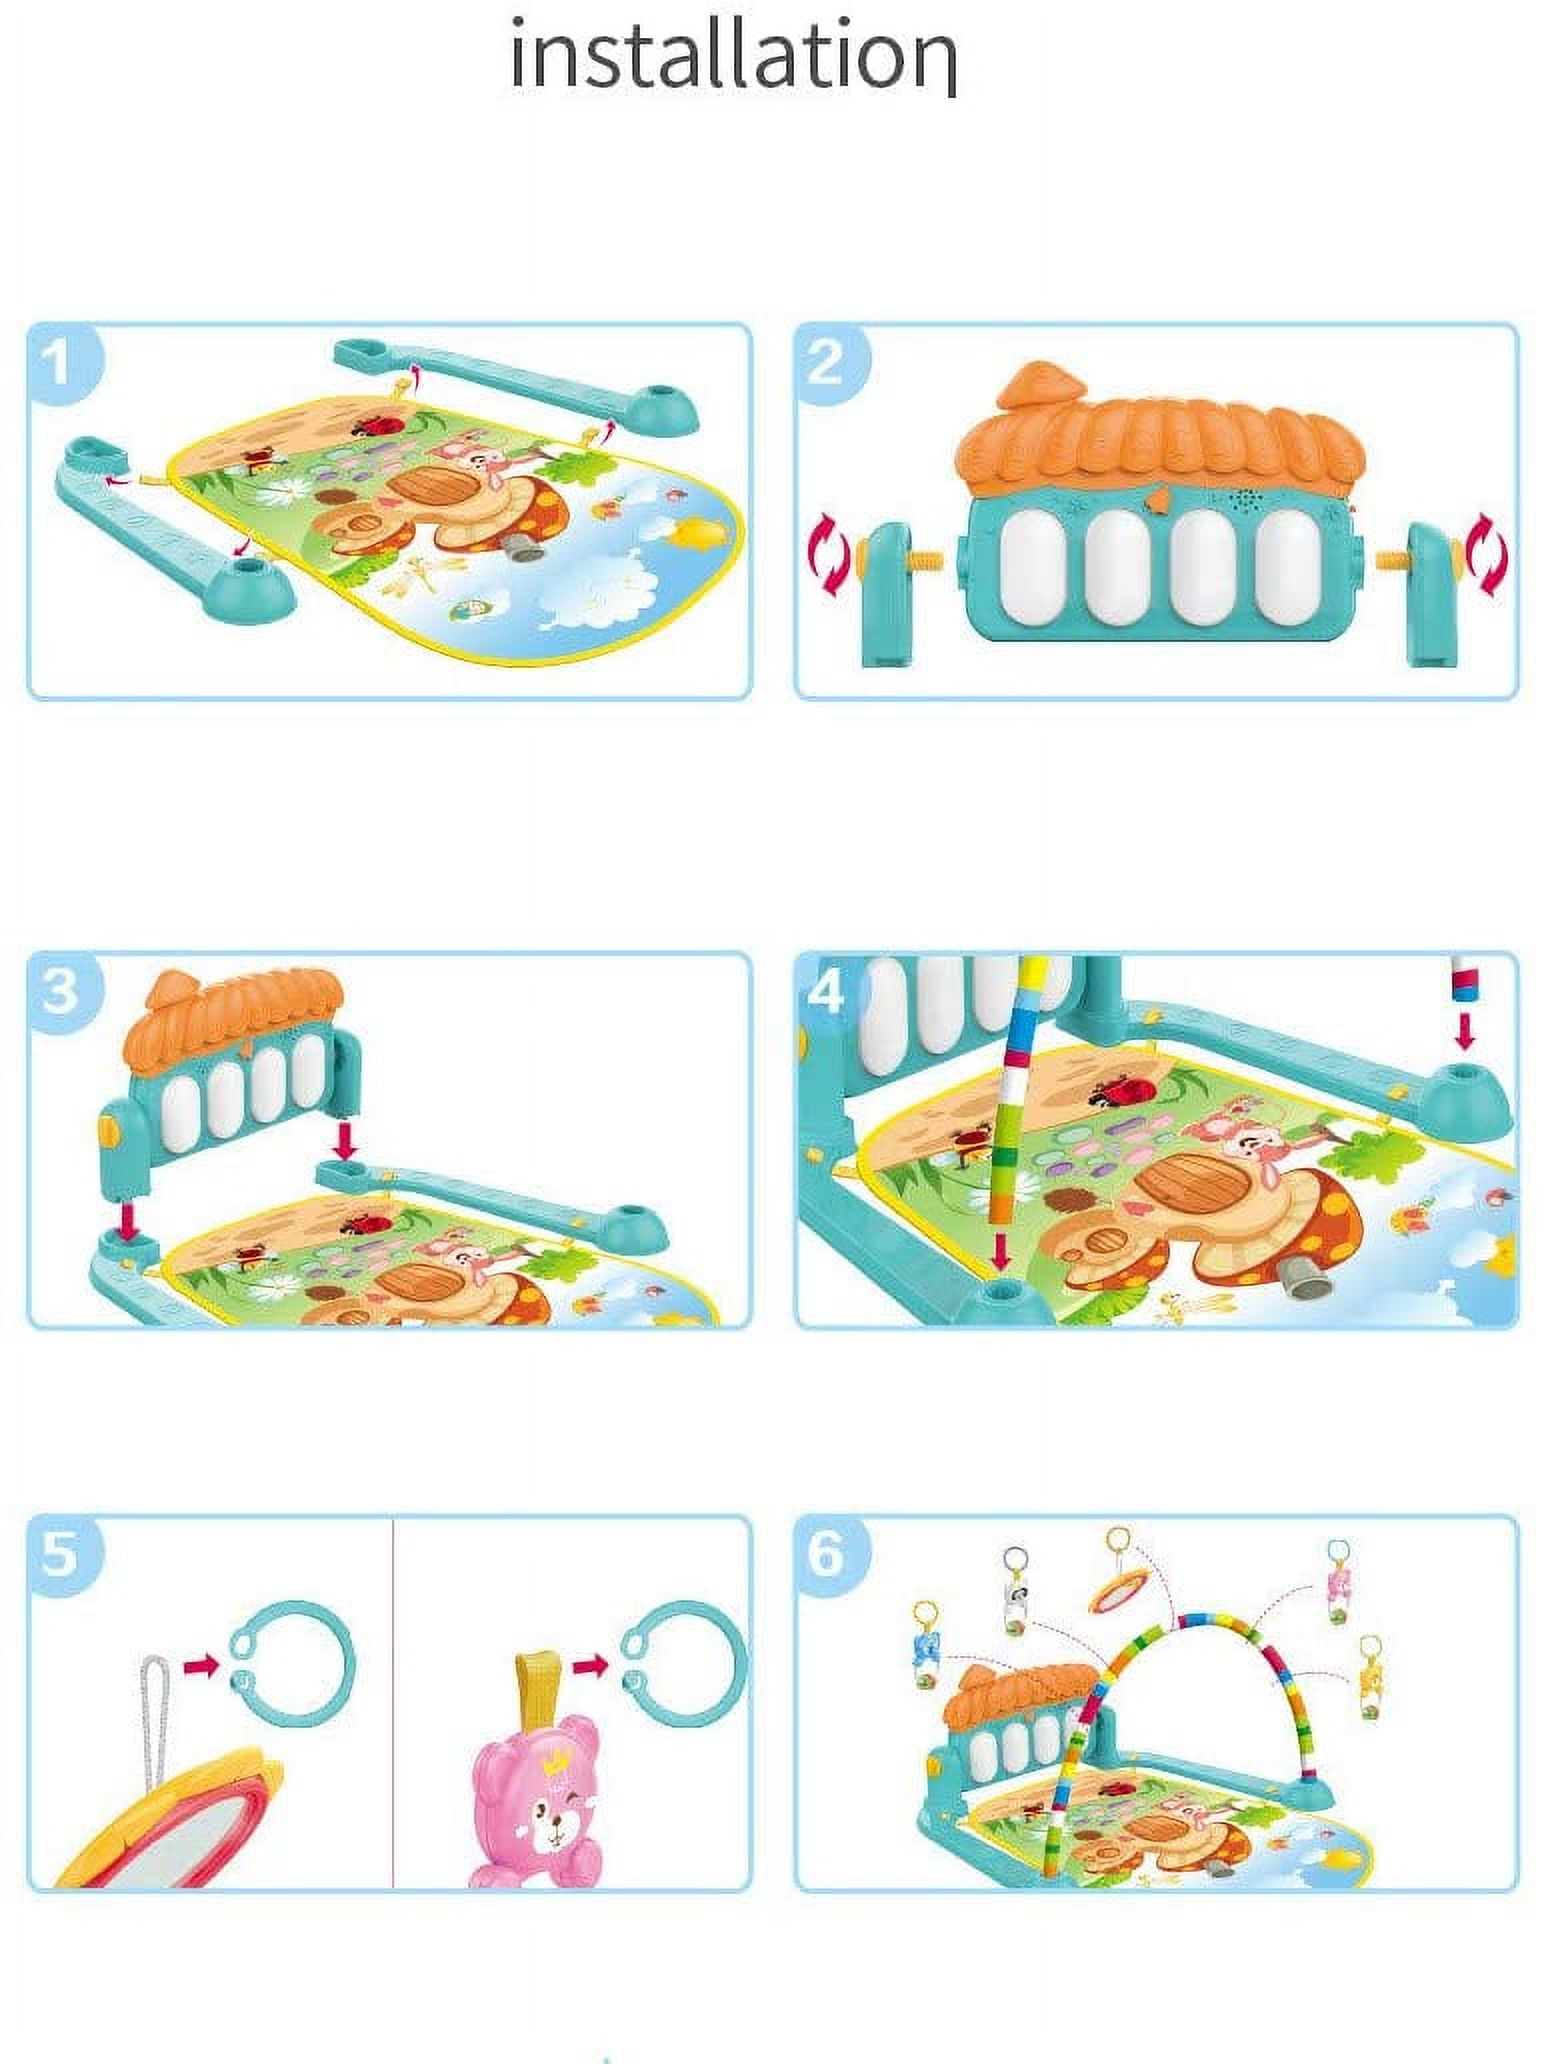 Baby Play Mat for Infant with Music and Mirror, Newborn Piano Activity Center Toys Gym Floor Playmat for Boys Girls - image 3 of 7